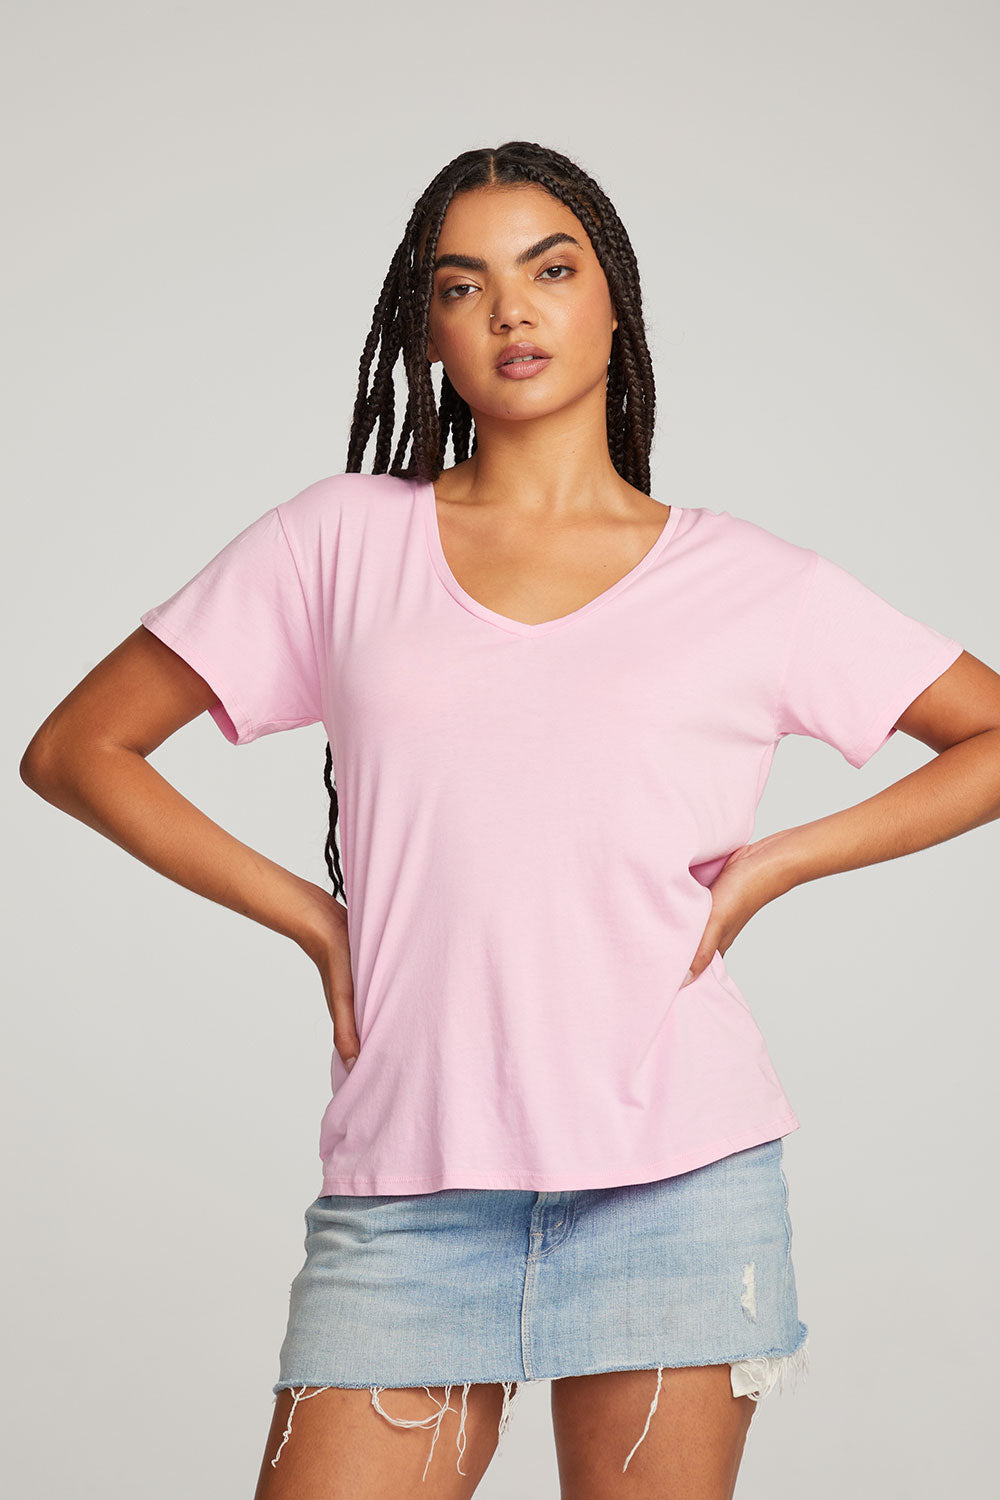 Everyday Essential Pastel Lavender V-neck Tee WOMENS chaserbrand